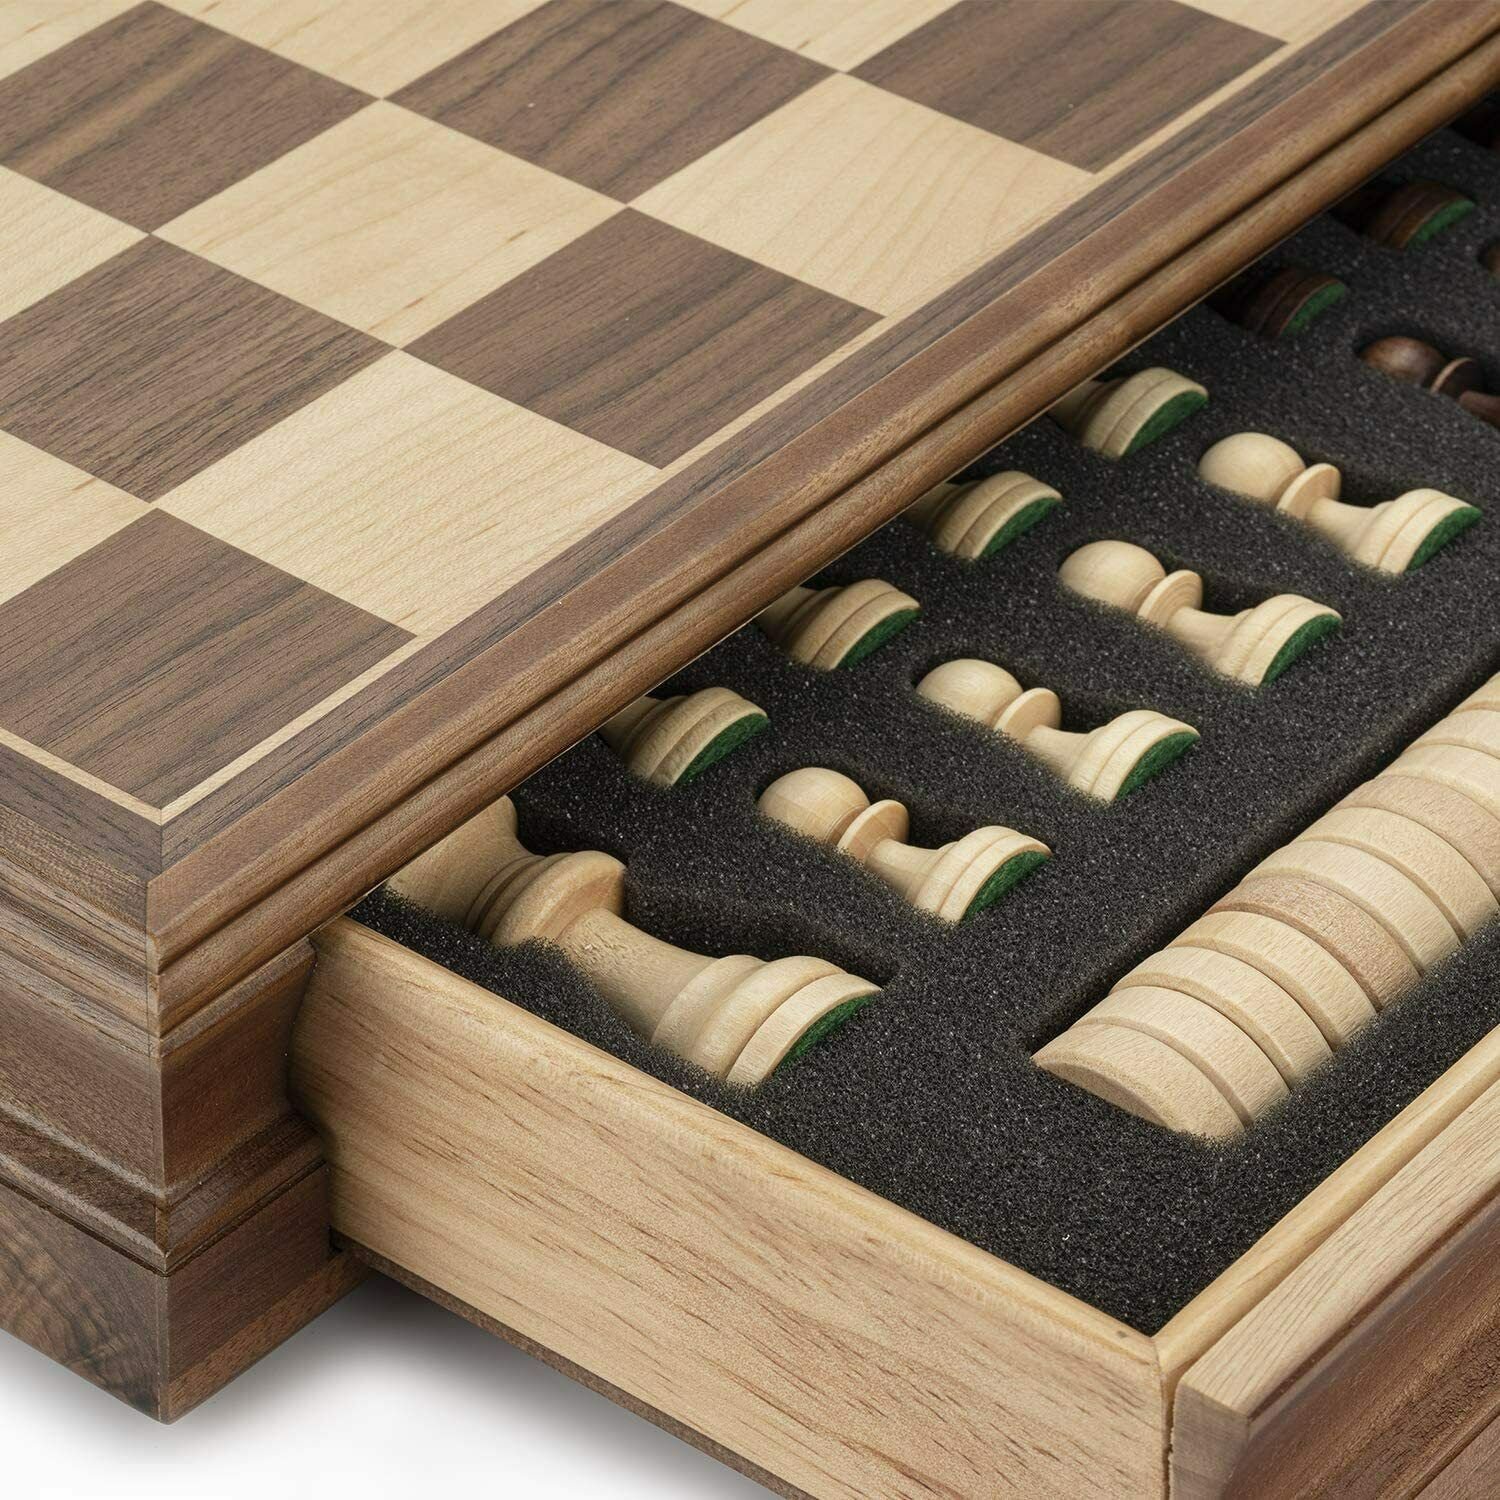 15" Wooden Chess & Checkers Set w/Storage Drawer w/3" King Height Chess